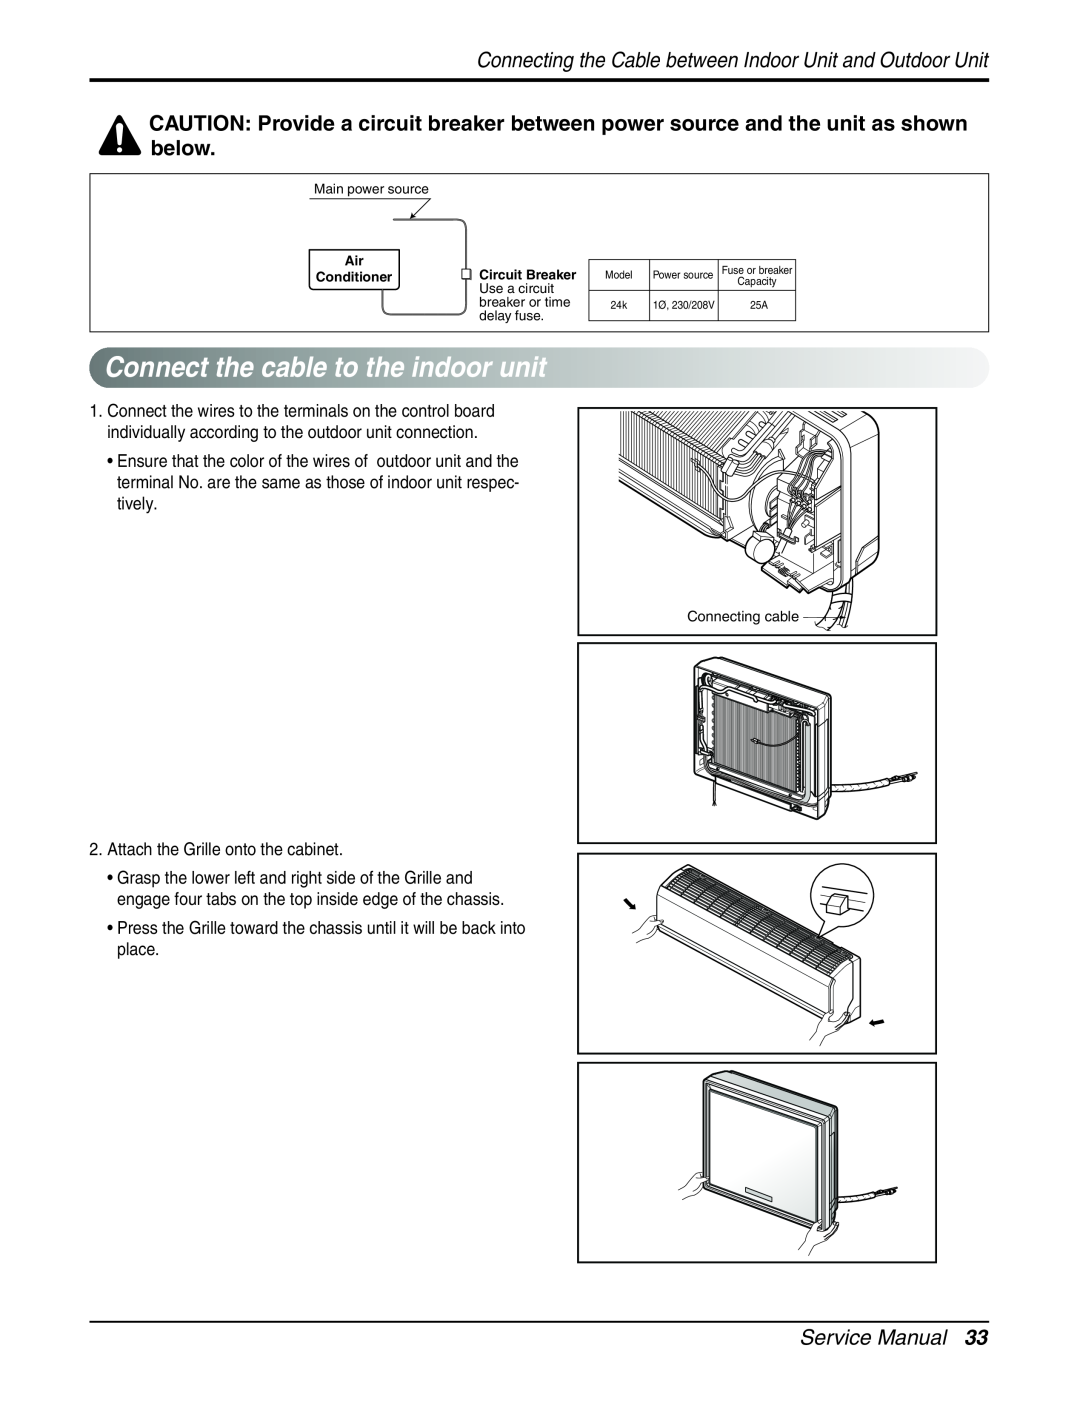 LG Electronics A2UH243FA0(LMU240HE) Connectthecable totheindoorunit, Service Manual, Attach the Grille onto the cabinet 